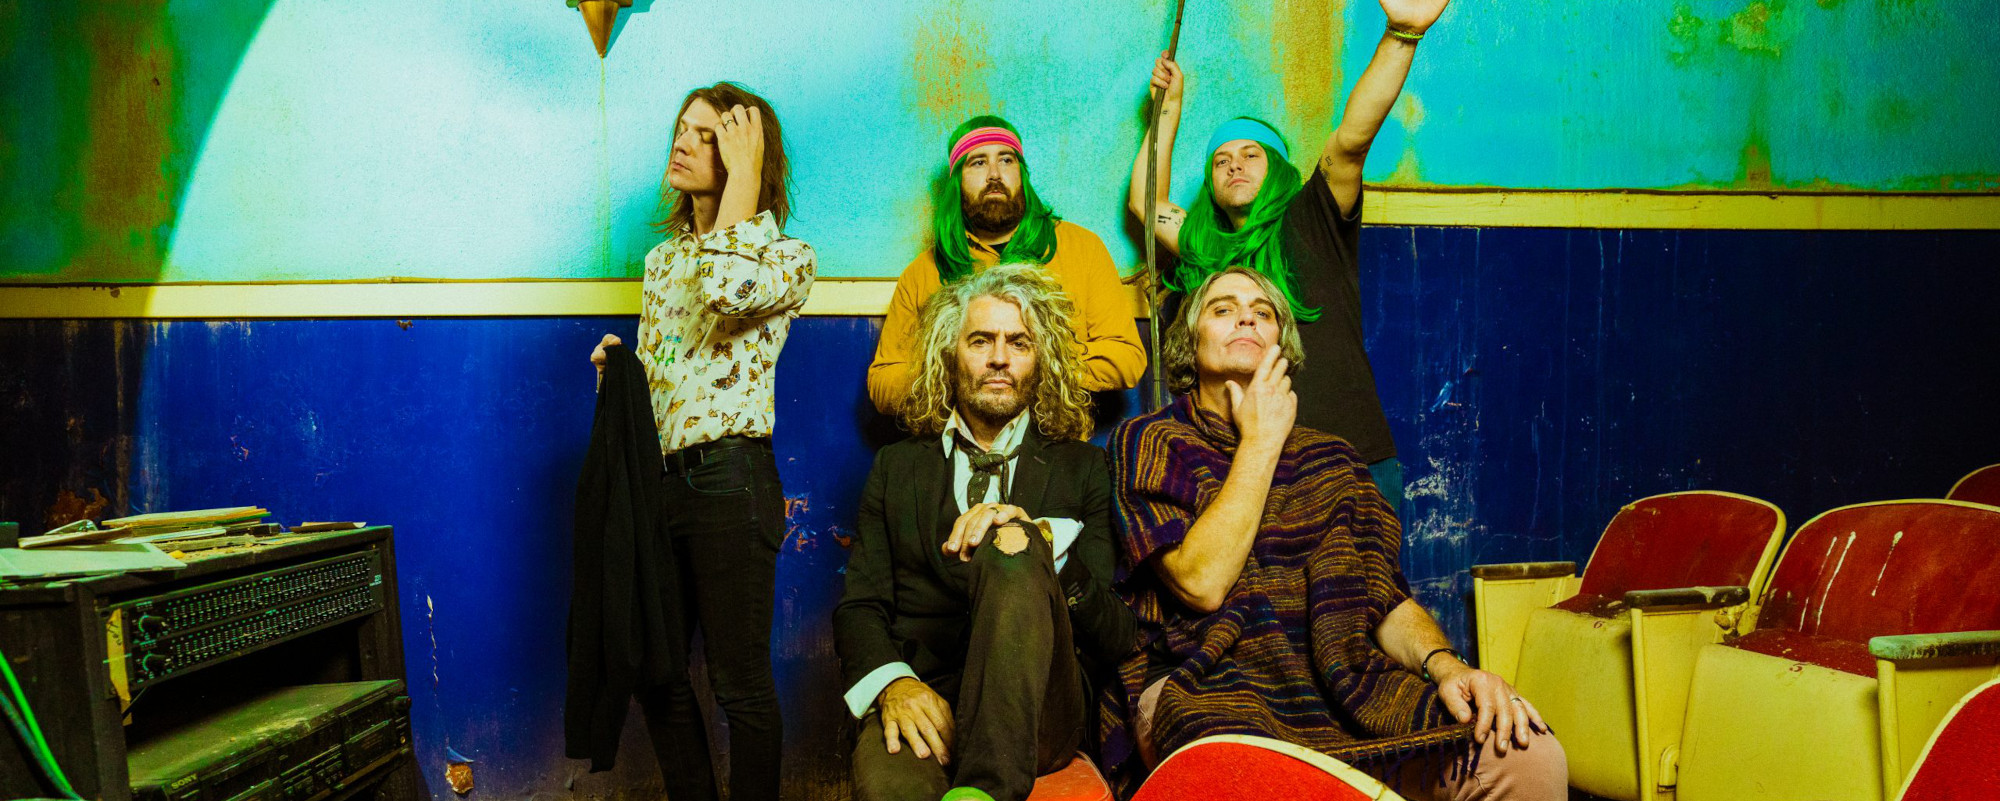 Behind the Band Name: The Flaming Lips